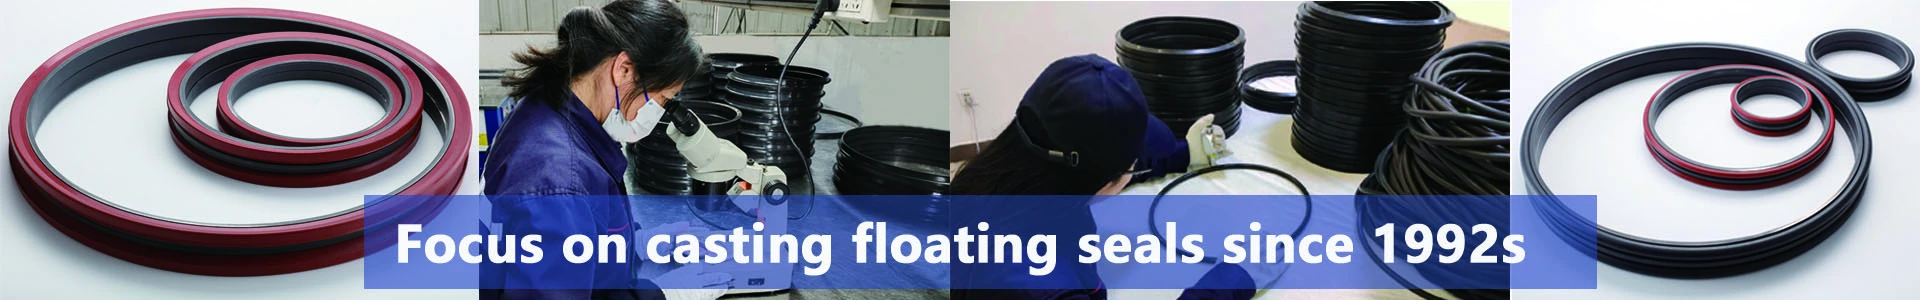 Fuyote focus on floating seal manufacture since 1992